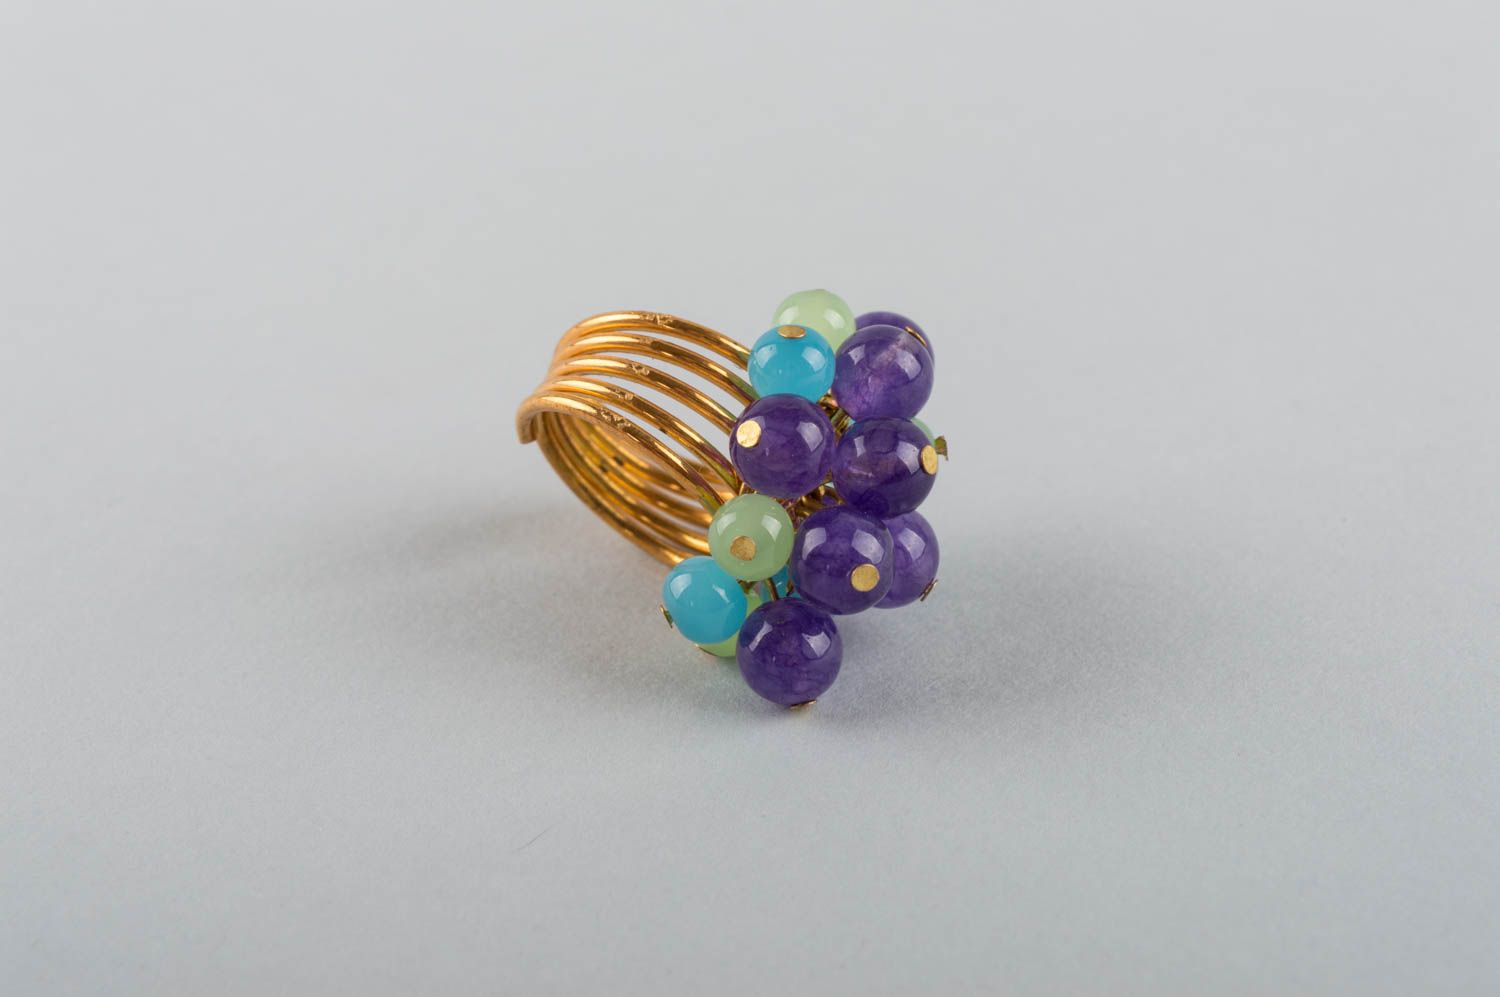 Handmade jewelry ring with latten basis and natural stone beads in blue colors photo 4